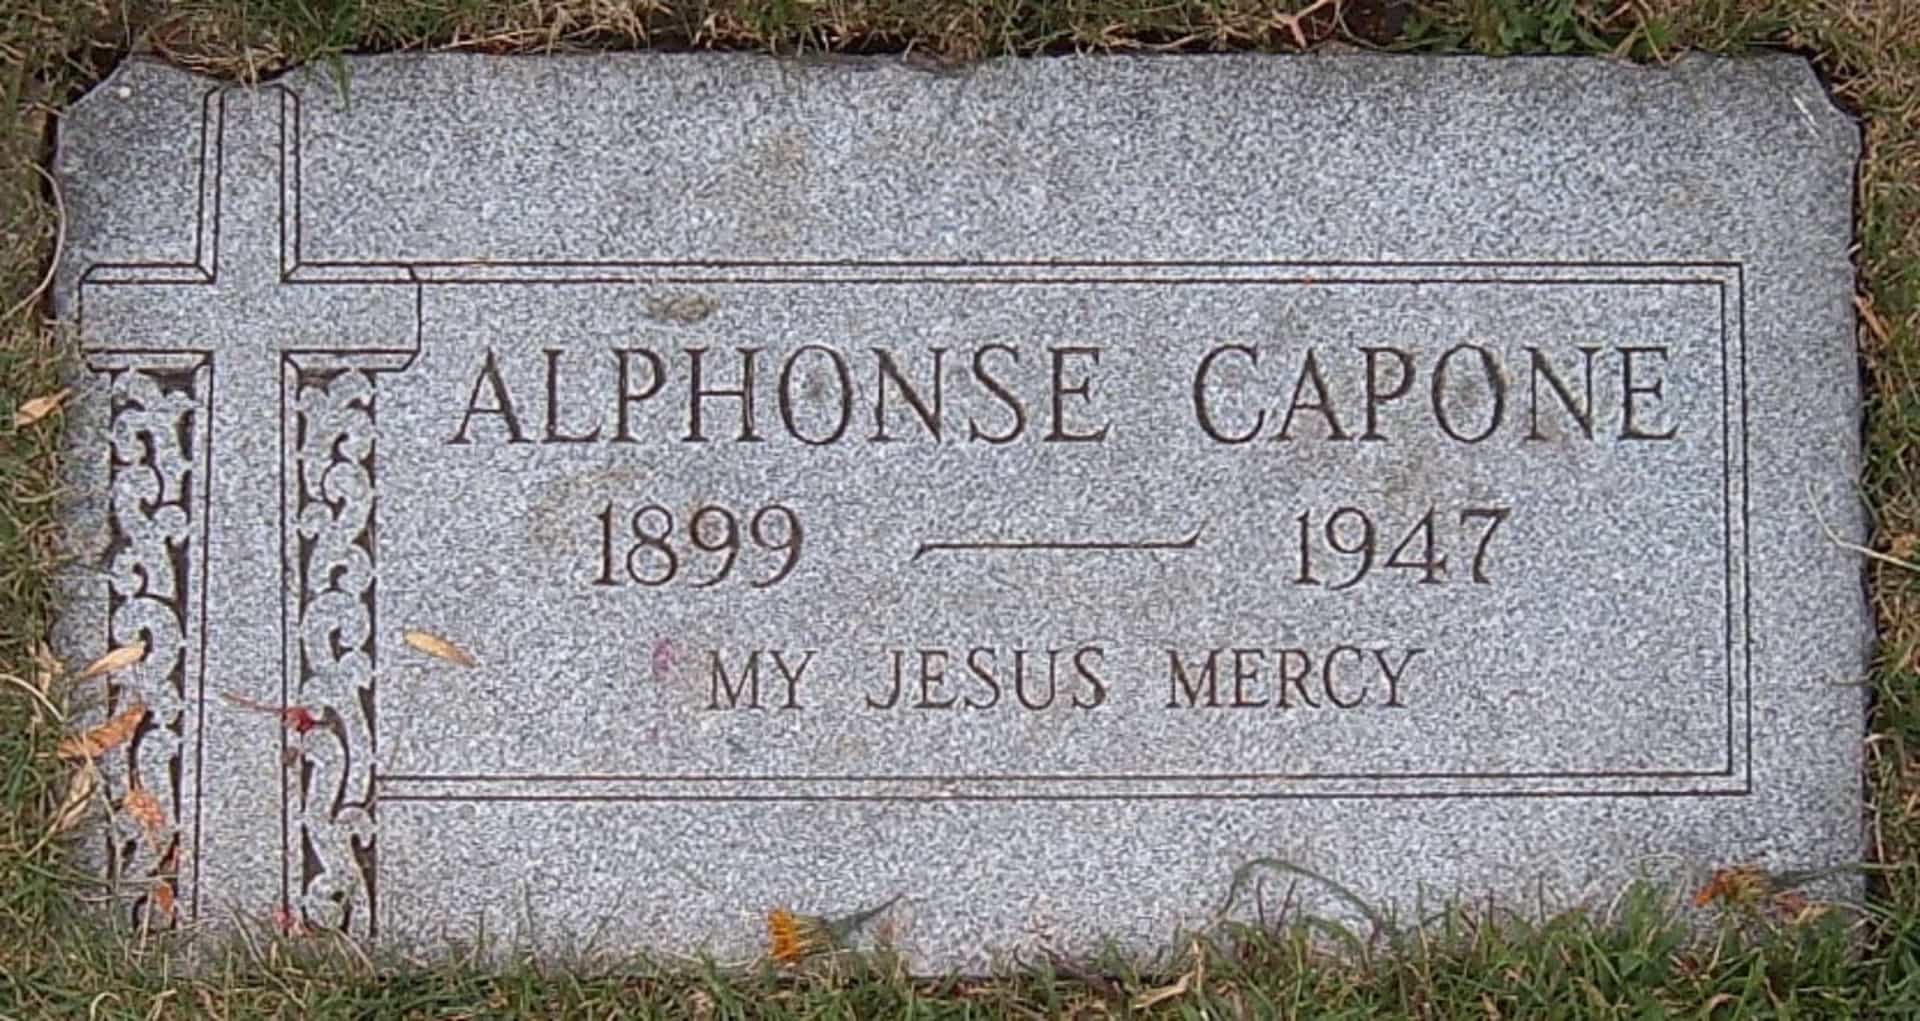 <p>Al Capone's body was transferred to Chicago where he was initially buried at Mount Olive Cemetery in Chicago. But in 1950, Capone's remains, along with those of his father, Gabriele, and brother, Salvatore, were moved to Mount Carmel Cemetery in Hillside, Illinois. Capone's grave marker is still visible today. Buried in the same cemetery is Frank Nitti, Capone's loyal henchman.</p><p>Sources: (<a href="https://www.fbi.gov/history/famous-cases/al-capone" rel="noopener">FBI</a>) (<a href="https://www.atf.gov/our-history/eliot-ness" rel="noopener">Bureau of Alcohol, Tobacco, Firearms and Explosives</a>) (<a href="https://www.britannica.com/event/Prohibition-United-States-history-1920-1933" rel="noopener">Britannica</a>)</p><p>See also: <a href="https://www.starsinsider.com/lifestyle/173595/alcatraz-americas-notorious-rock-star">Alcatraz, America's notorious "rock" star</a>.</p>